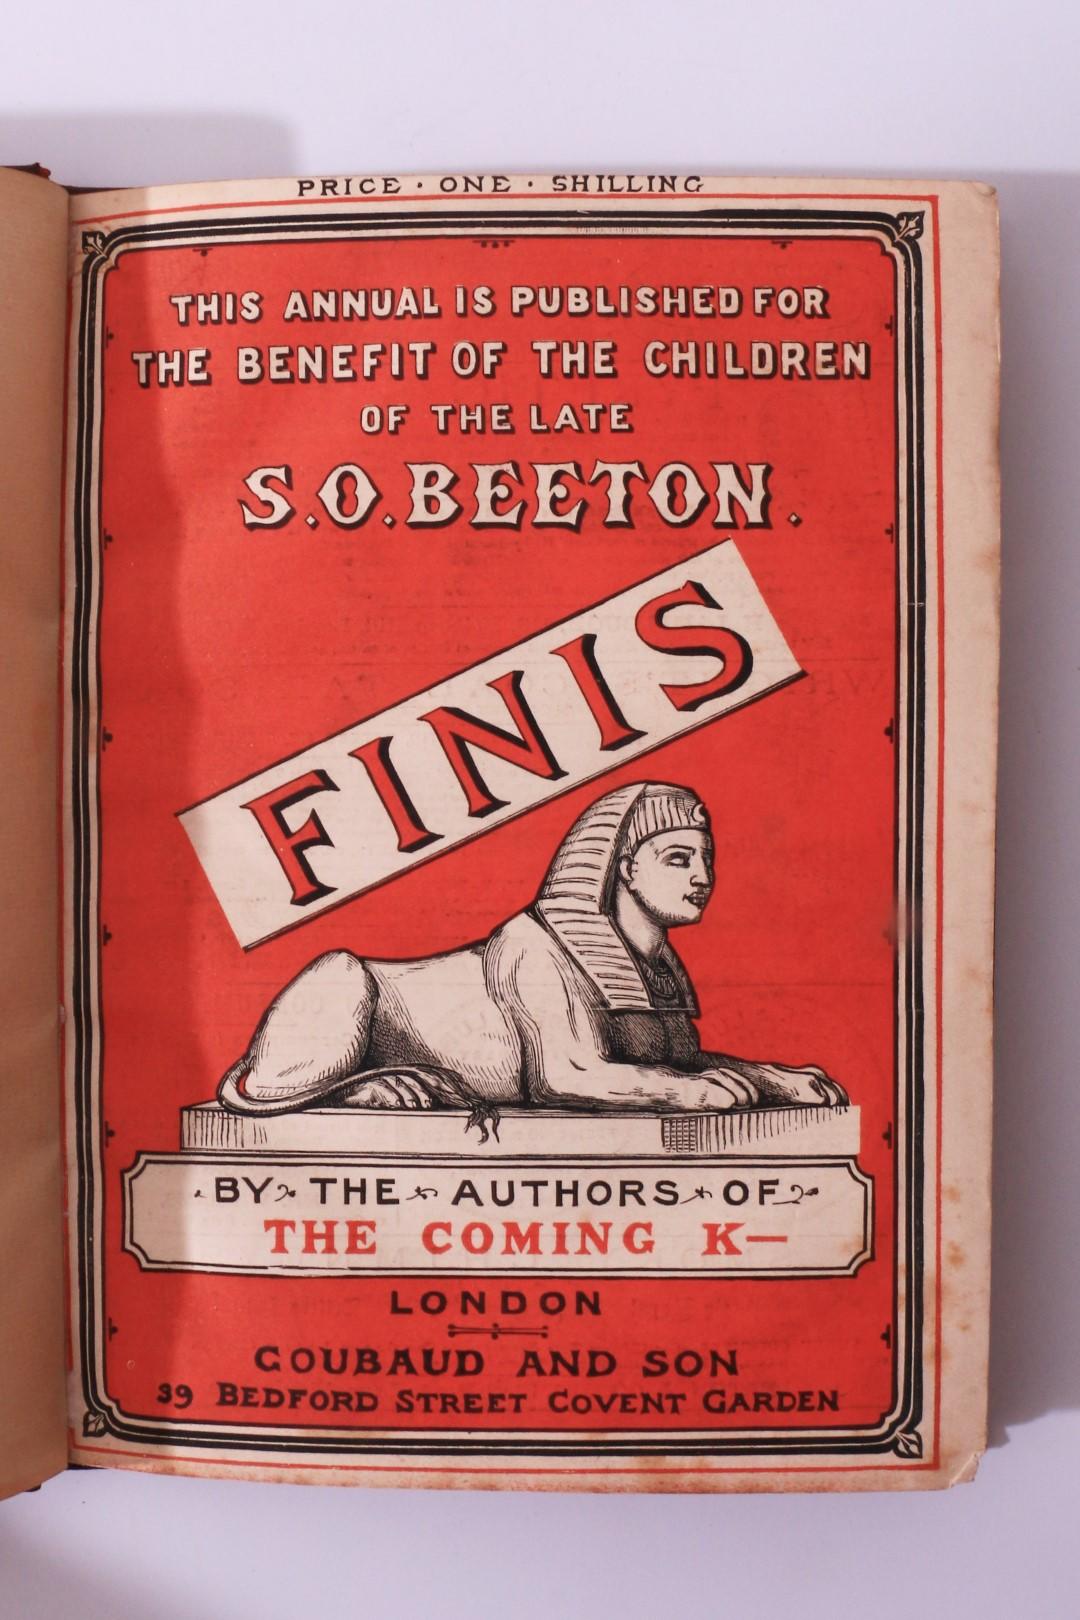 S.R. Emerson [ed.] - Beeton's Annual - Finis; or Coelebs and the Modern Sphinx - Goubaud and Son, 1877, First Edition.